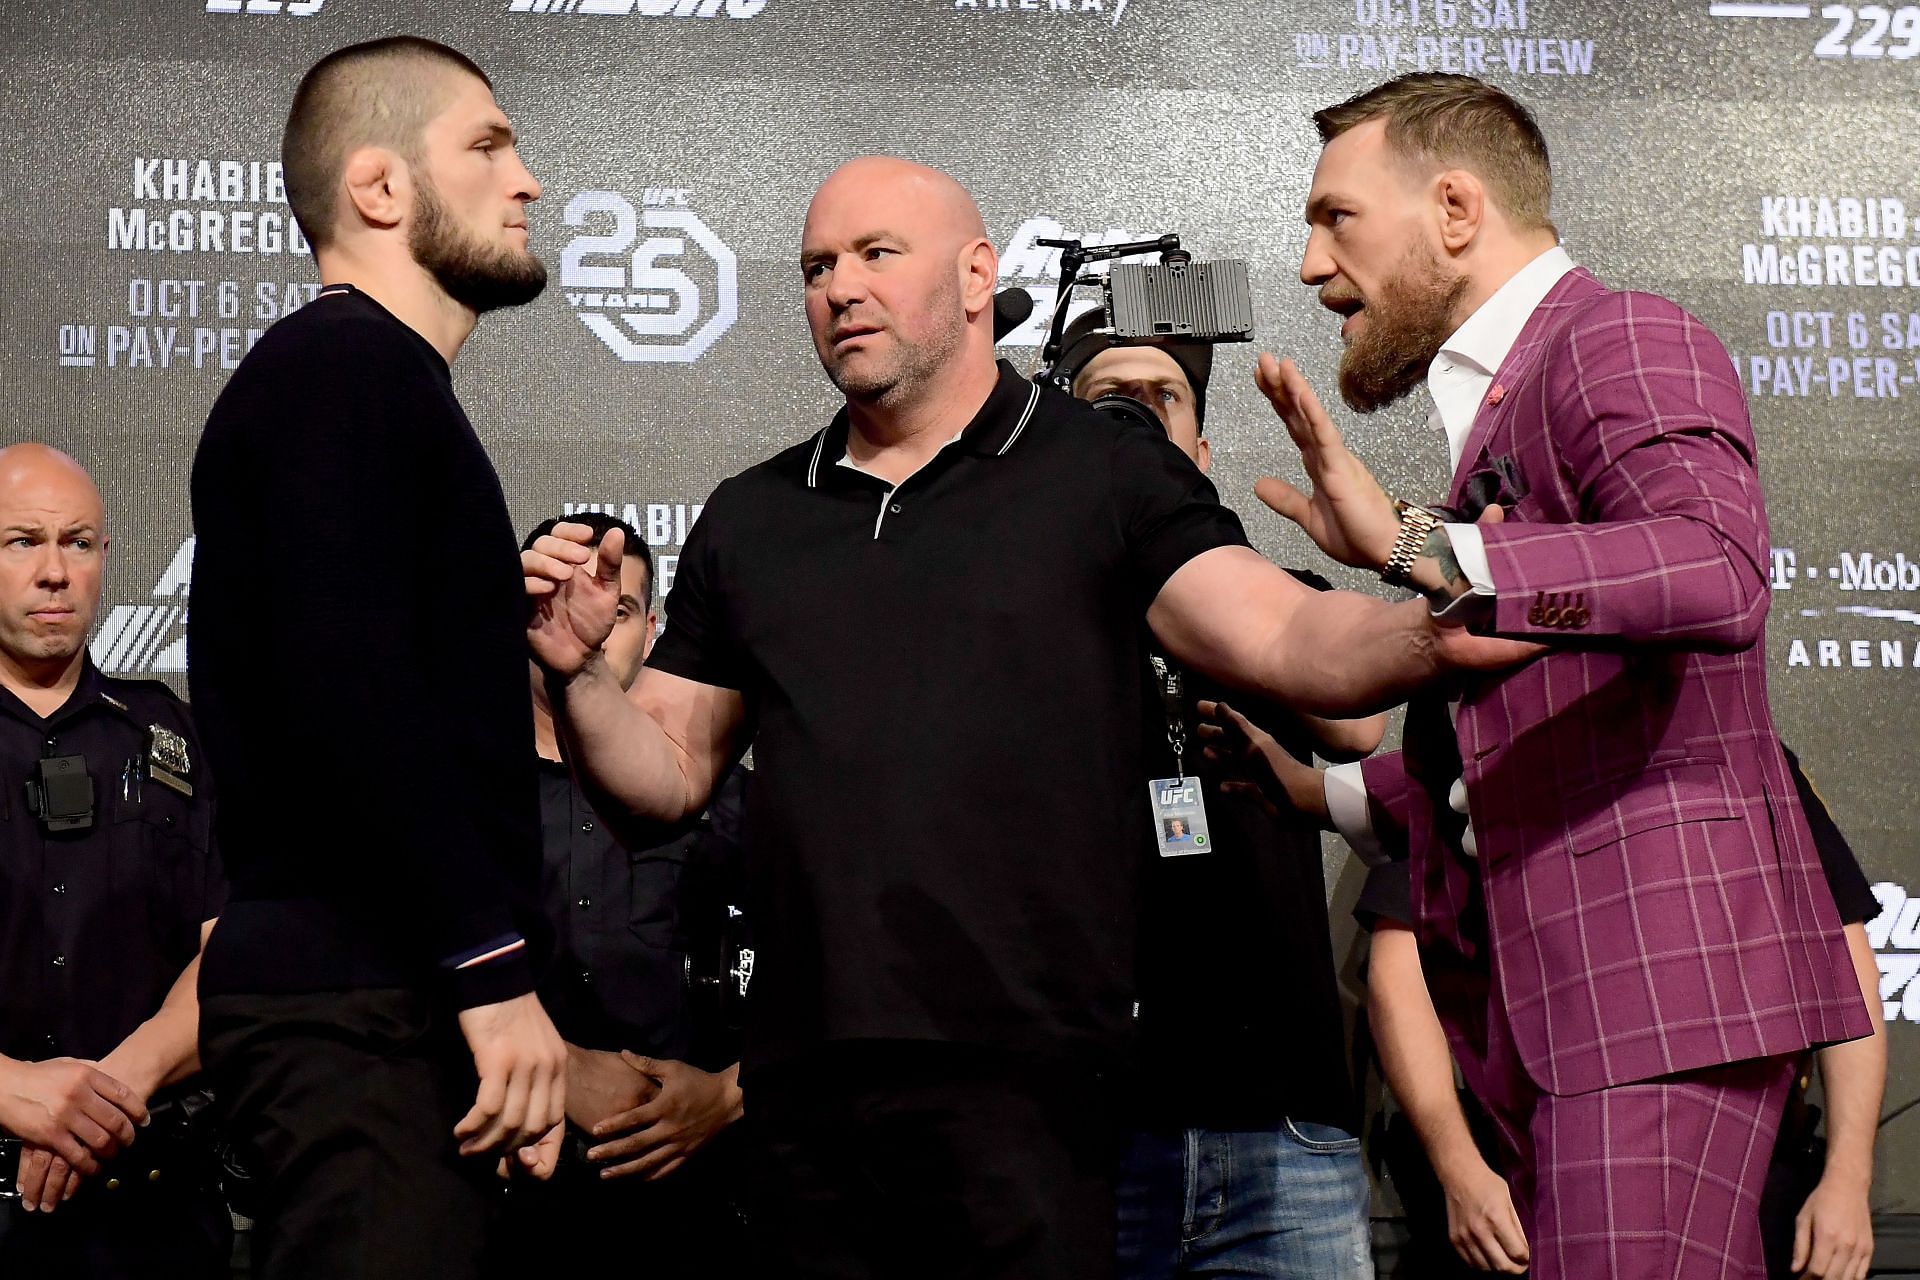 Could Conor McGregor tempt Khabib Nurmagomedov back into the UFC if he were to beat Islam Makhachev?